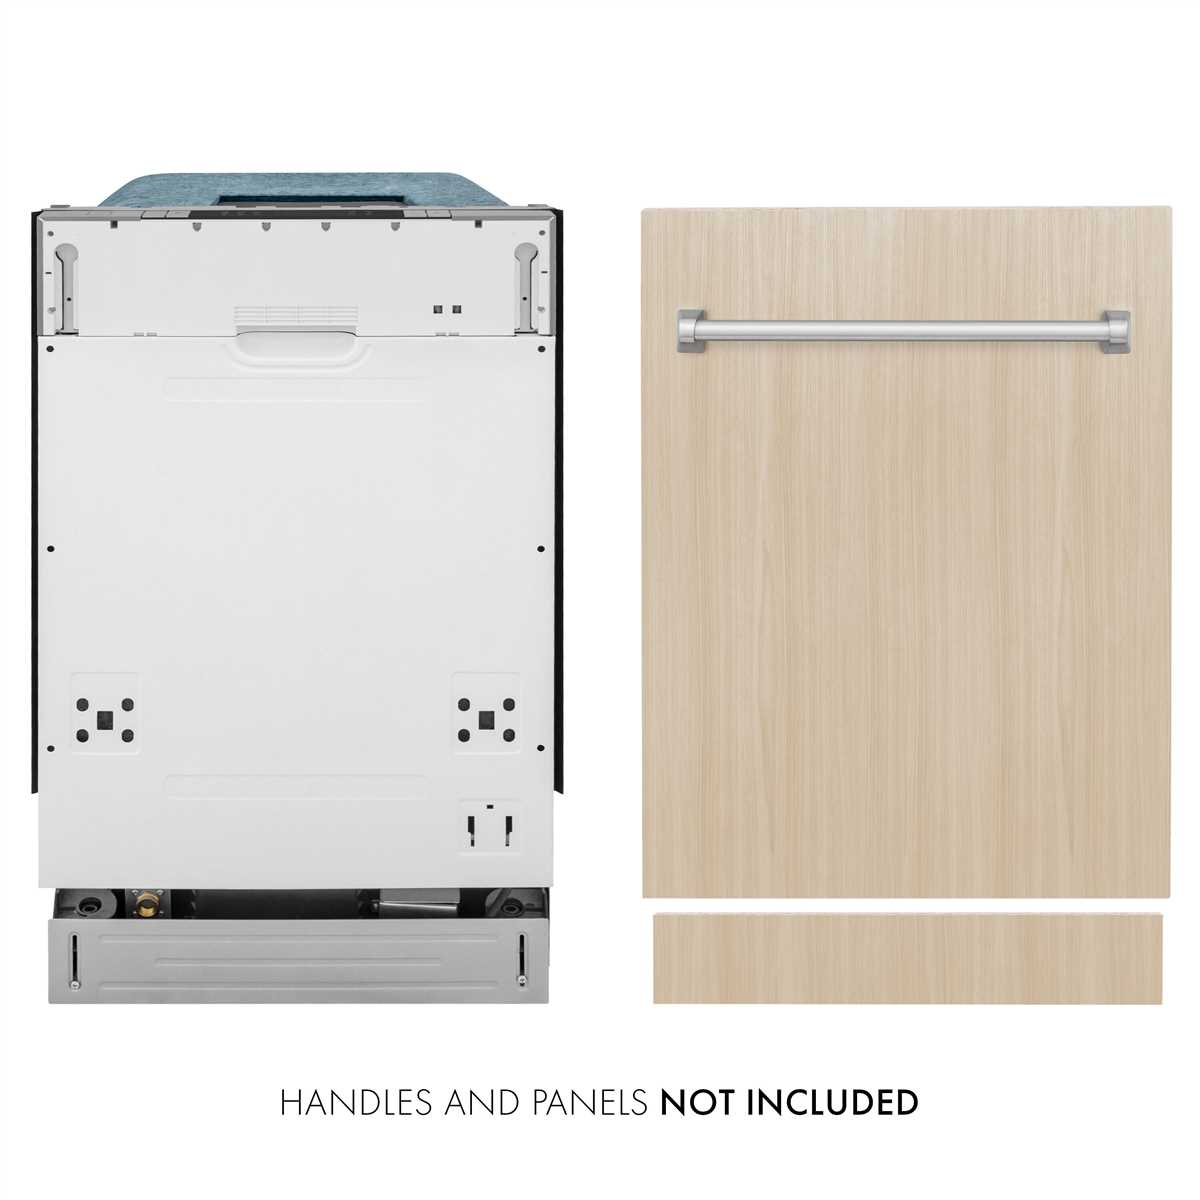 Integrated Dishwashers Perfect for Cleaning Large Plates